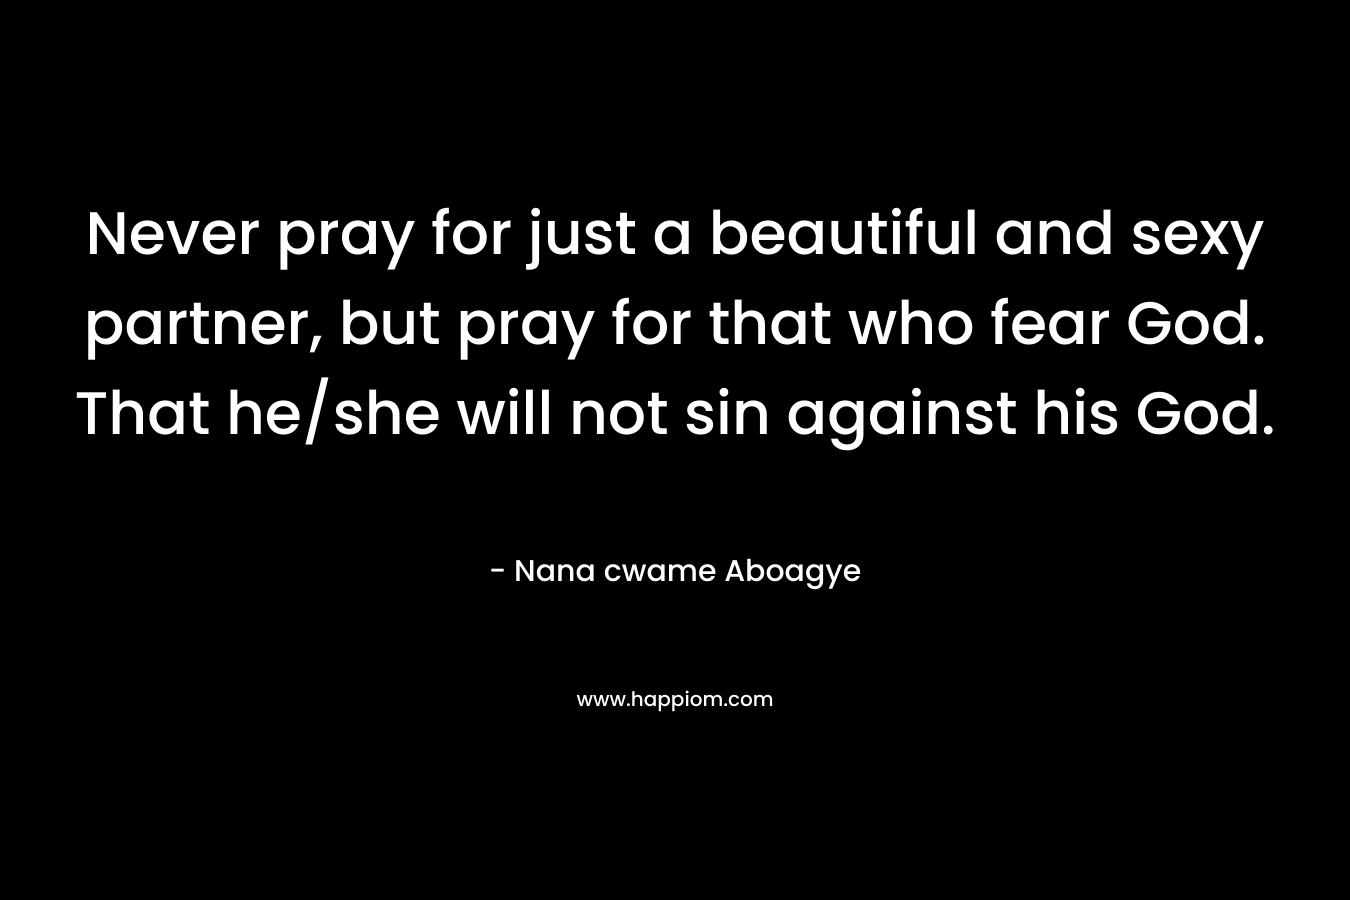 Never pray for just a beautiful and sexy partner, but pray for that who fear God. That he/she will not sin against his God.